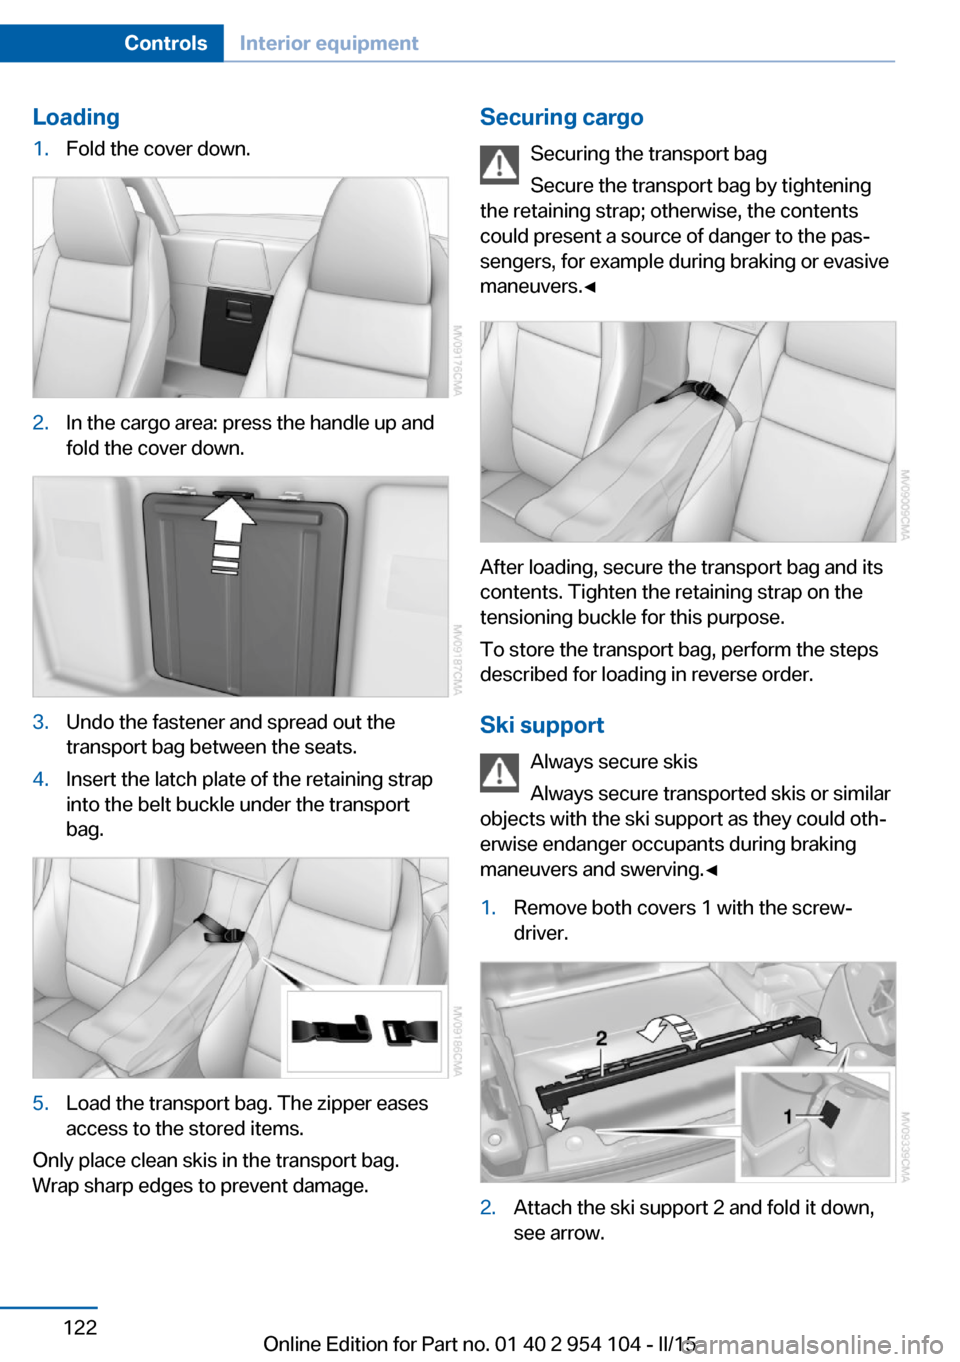 BMW Z4 2015 E89 Owners Manual Loading1.Fold the cover down.2.In the cargo area: press the handle up and
fold the cover down.3.Undo the fastener and spread out the
transport bag between the seats.4.Insert the latch plate of the ret